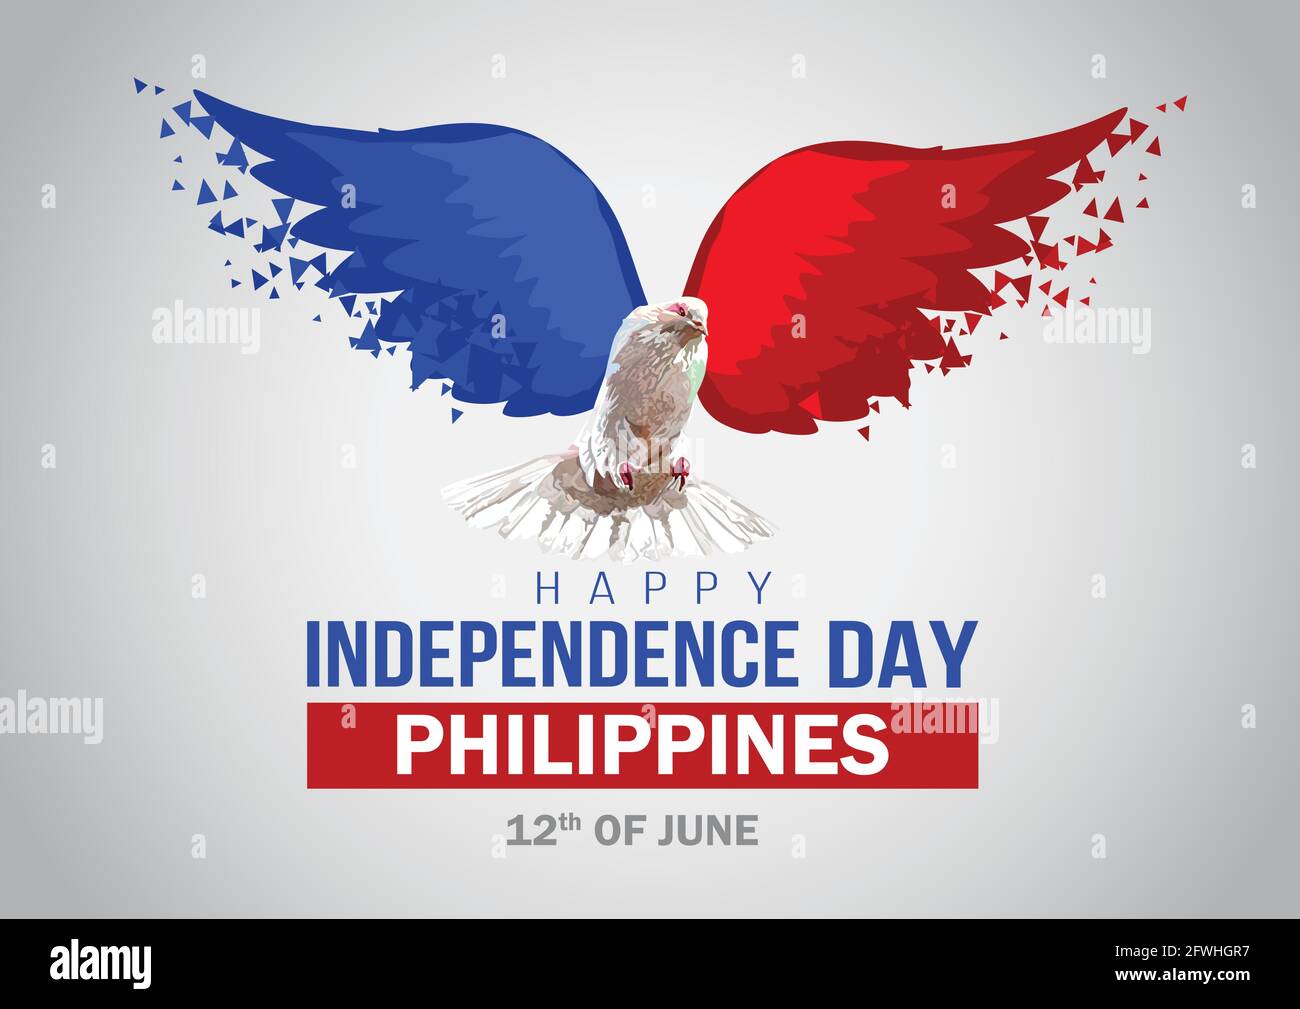 Happy Independence Day Philippines Flying Dove With Philippine Flag Vector Illustration Design Stock Vector Image Art Alamy